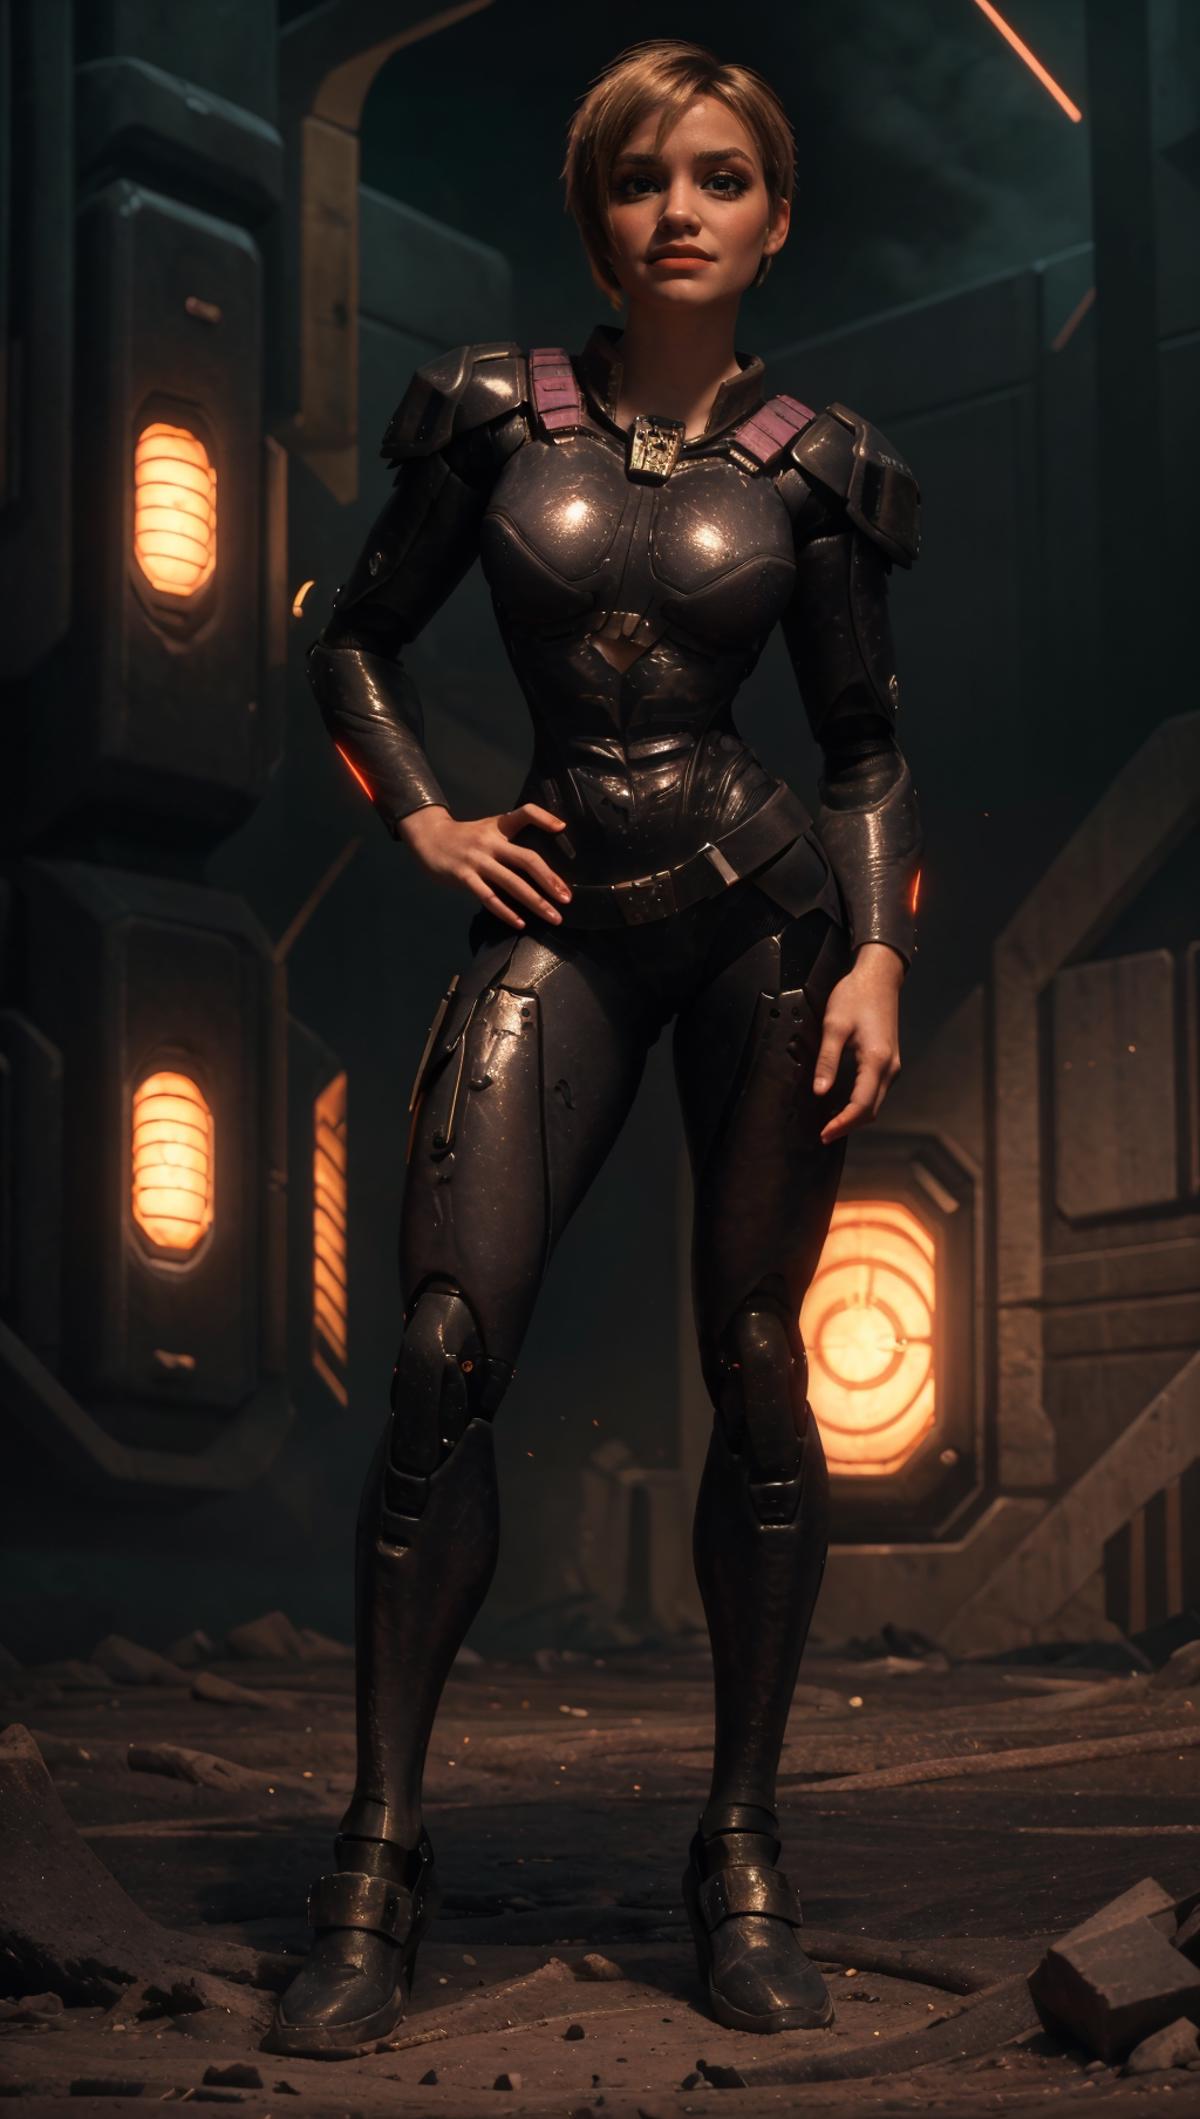 A 3D animated character of a female warrior in a futuristic setting.